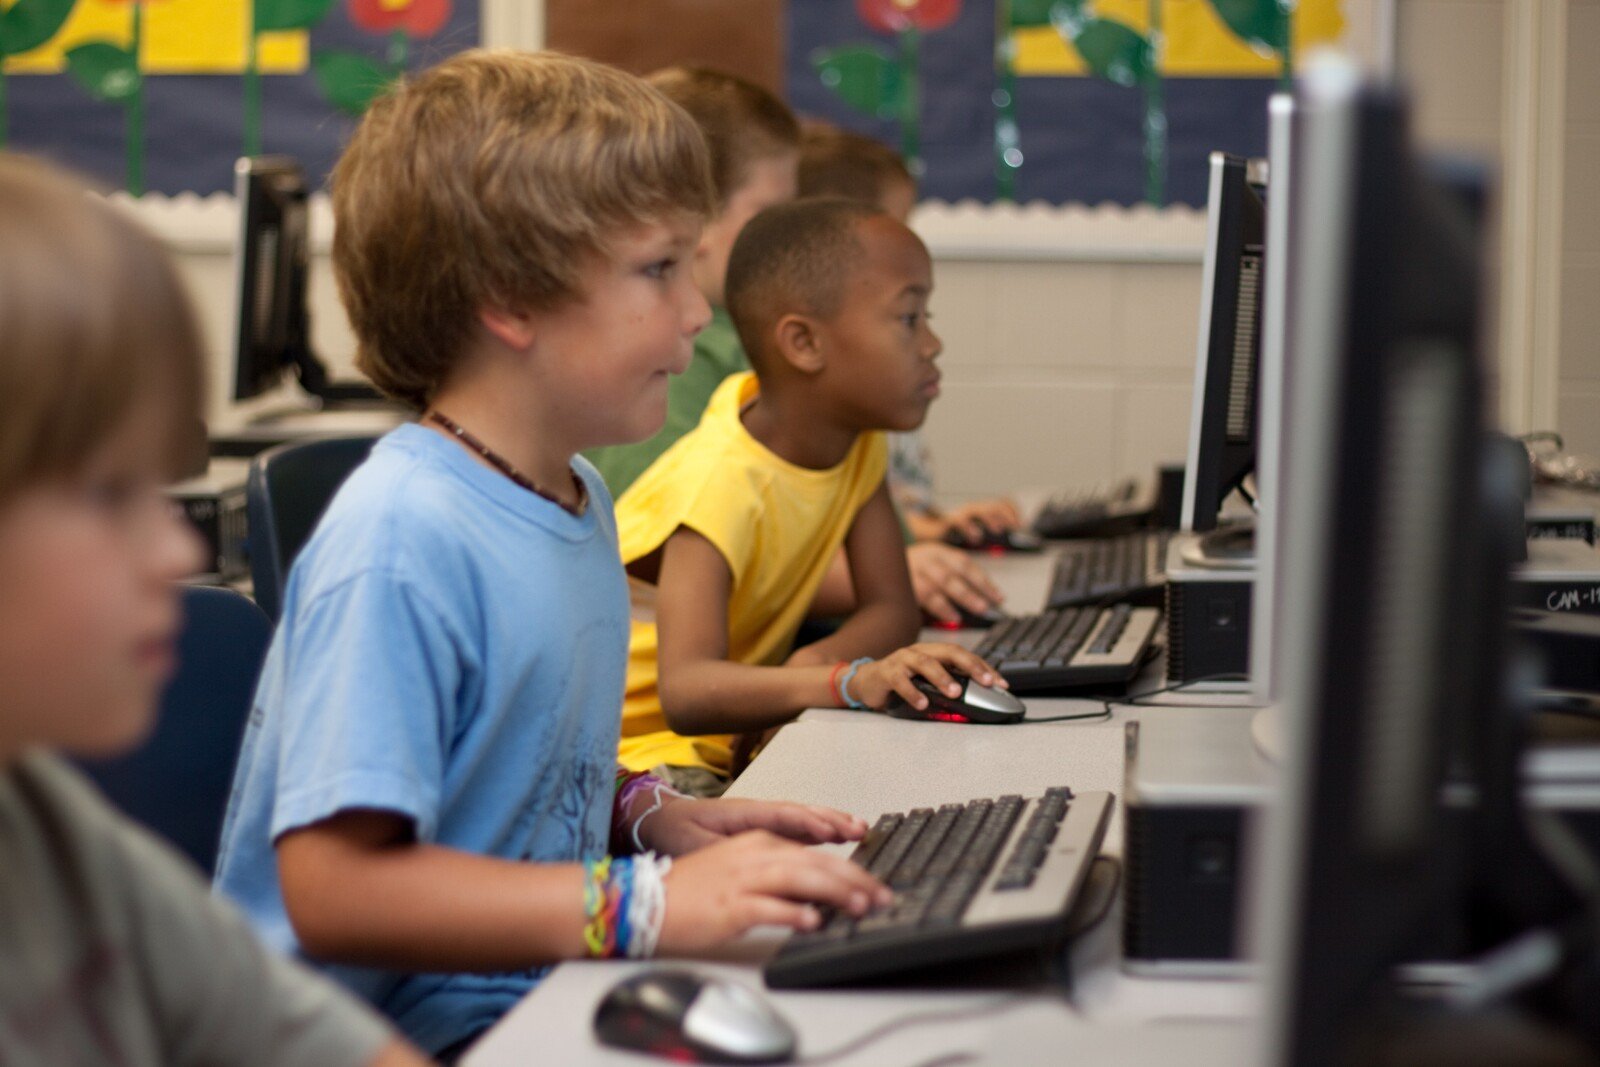 Students playing online learning games at school